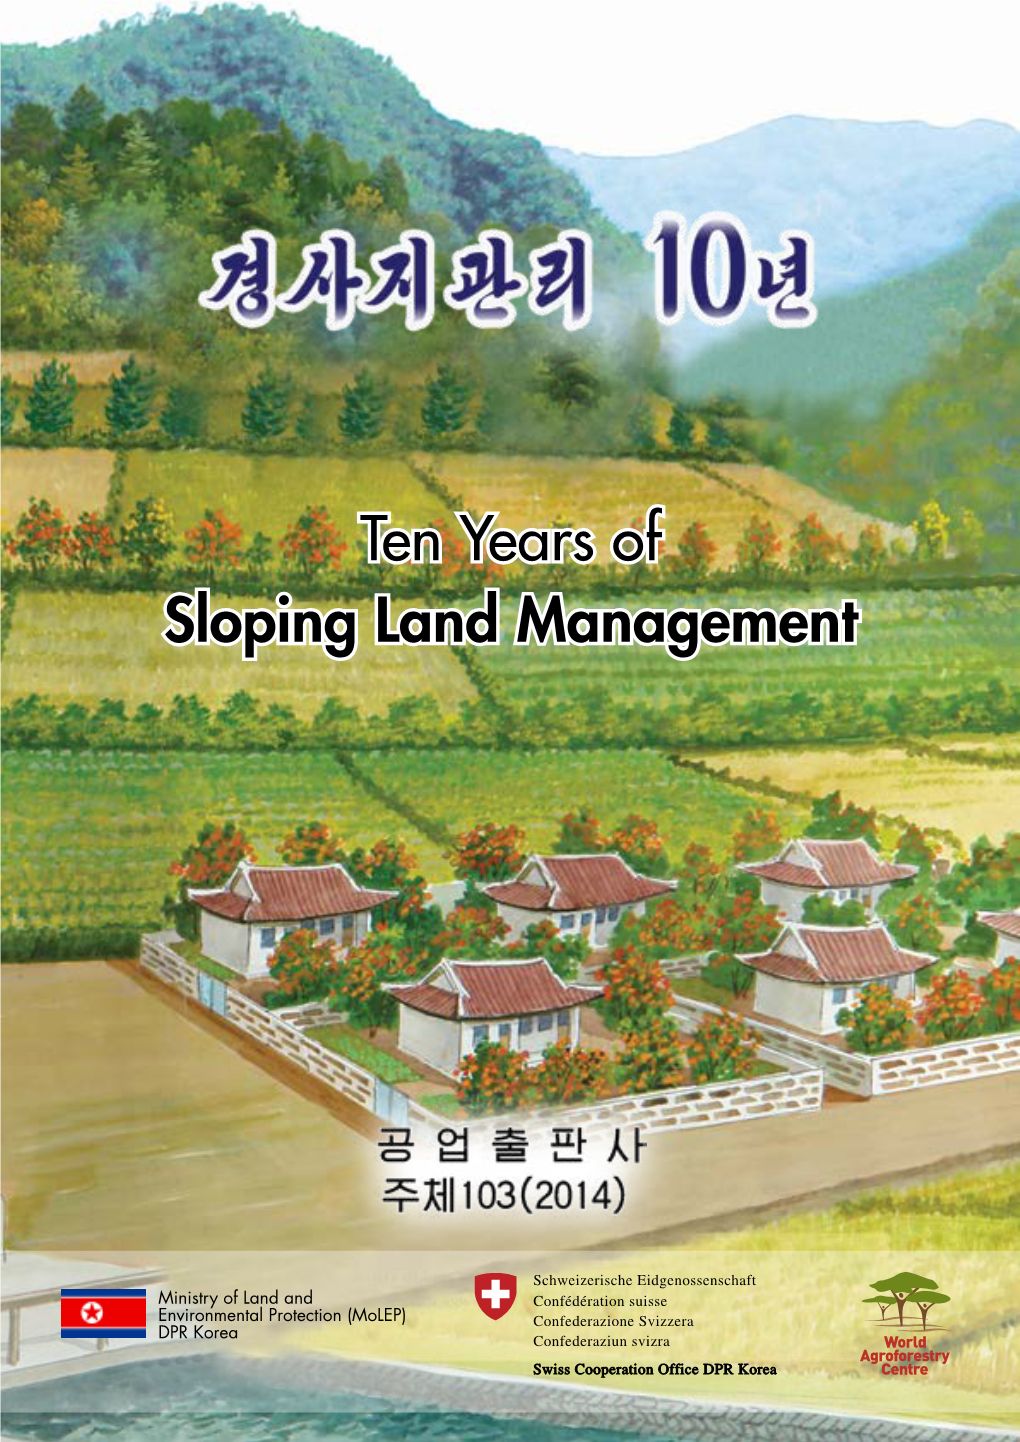 Ten Years of Sloping Land Management Ii 10 Years of Sloping Land Management “ the Advanced Science Andtechnology